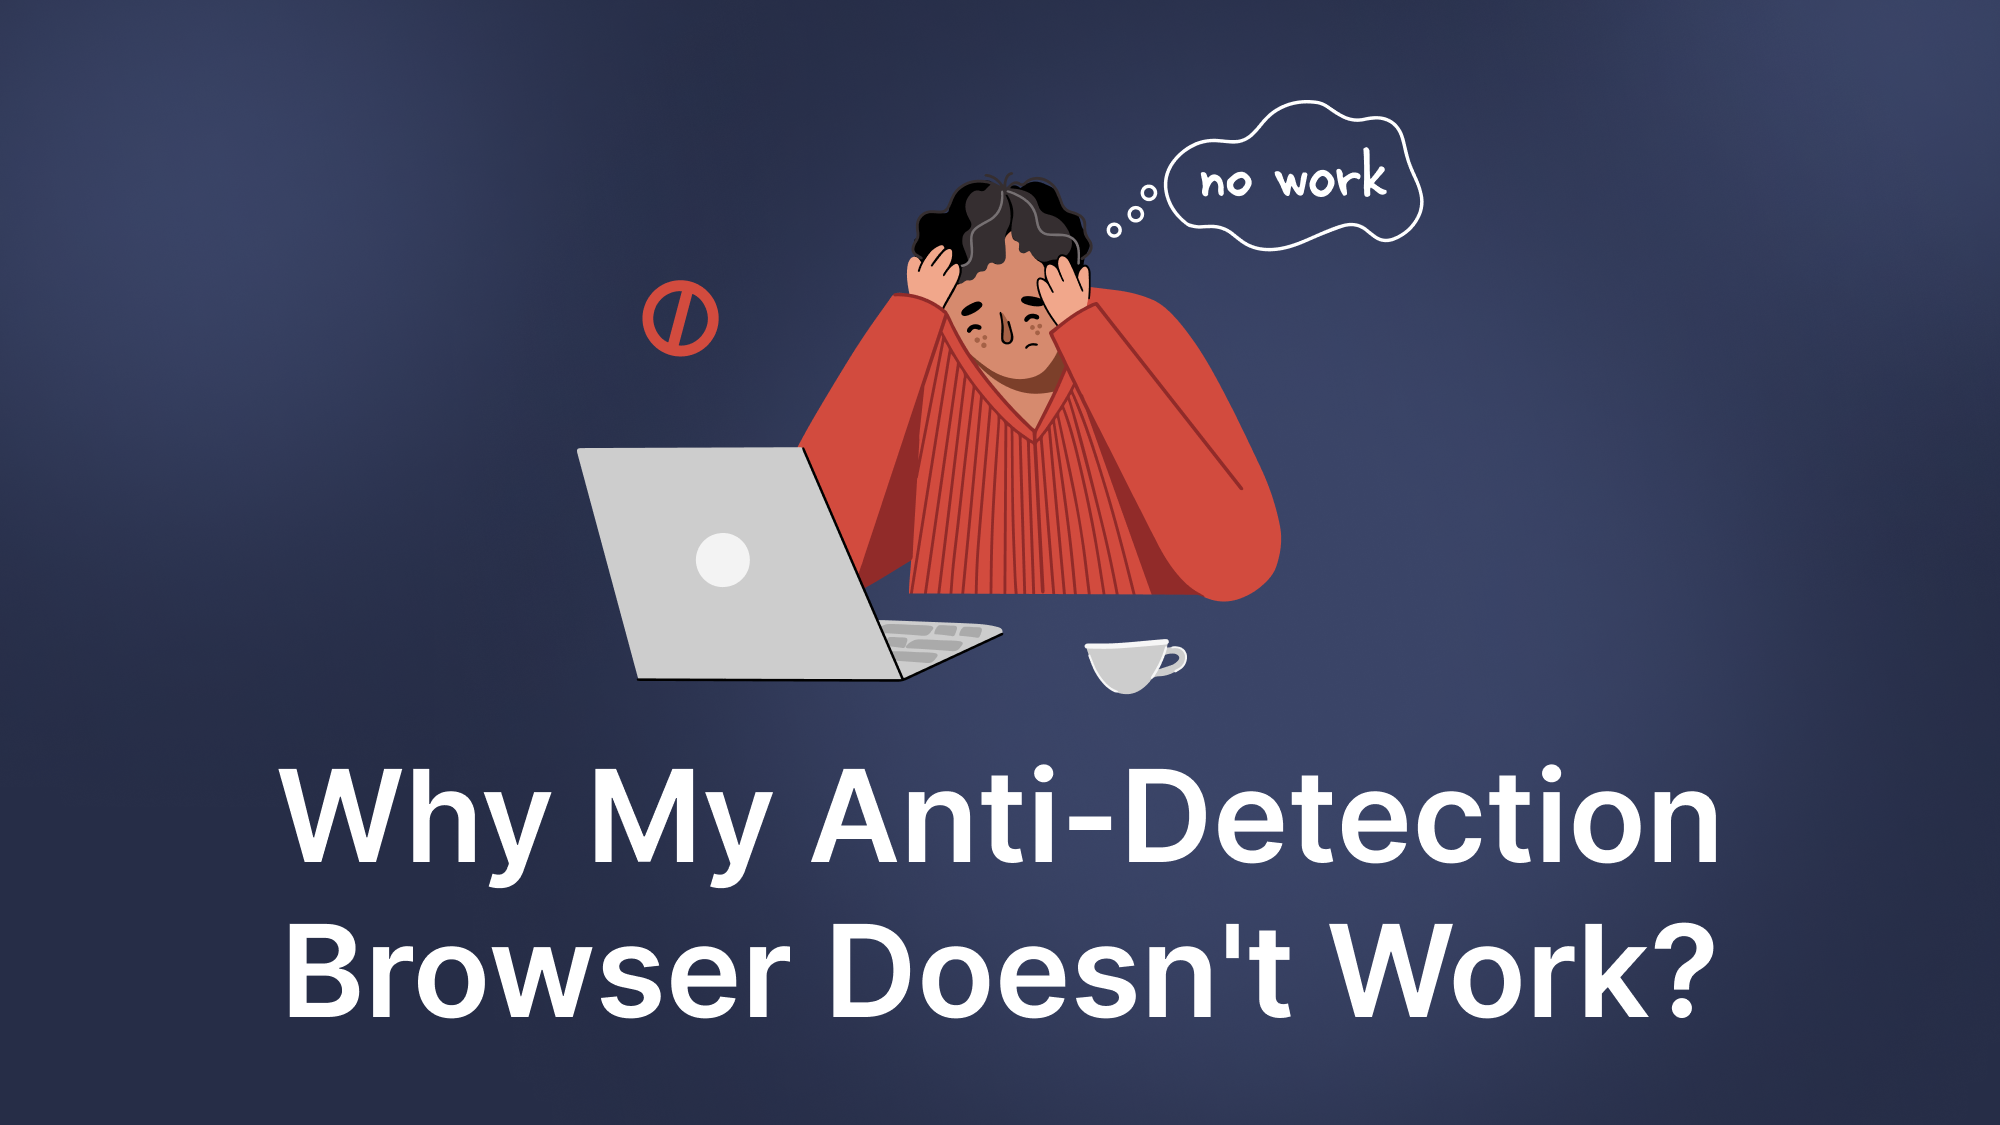 Anti-detection browser doesn't work: how to avoid account blocking